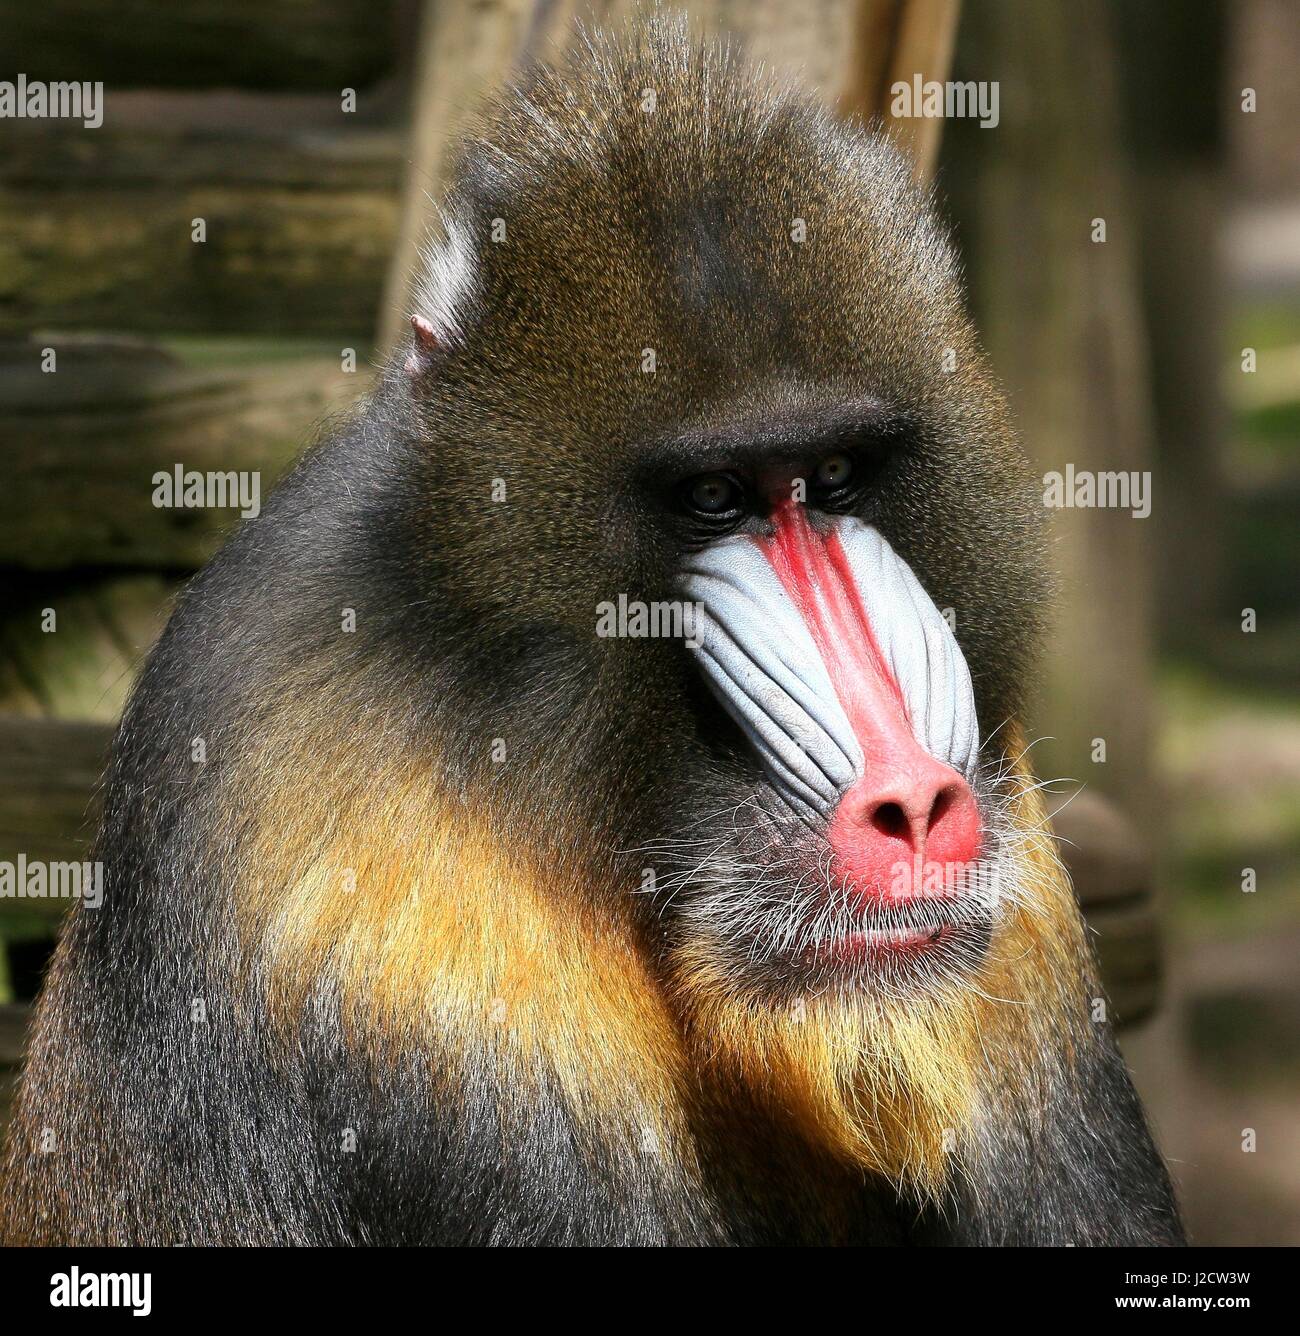 Mature male West African Mandrill (Mandrillus sphinx) in Ouwehands Dierenpark Rhenen Zoo, The Netherlands Stock Photo